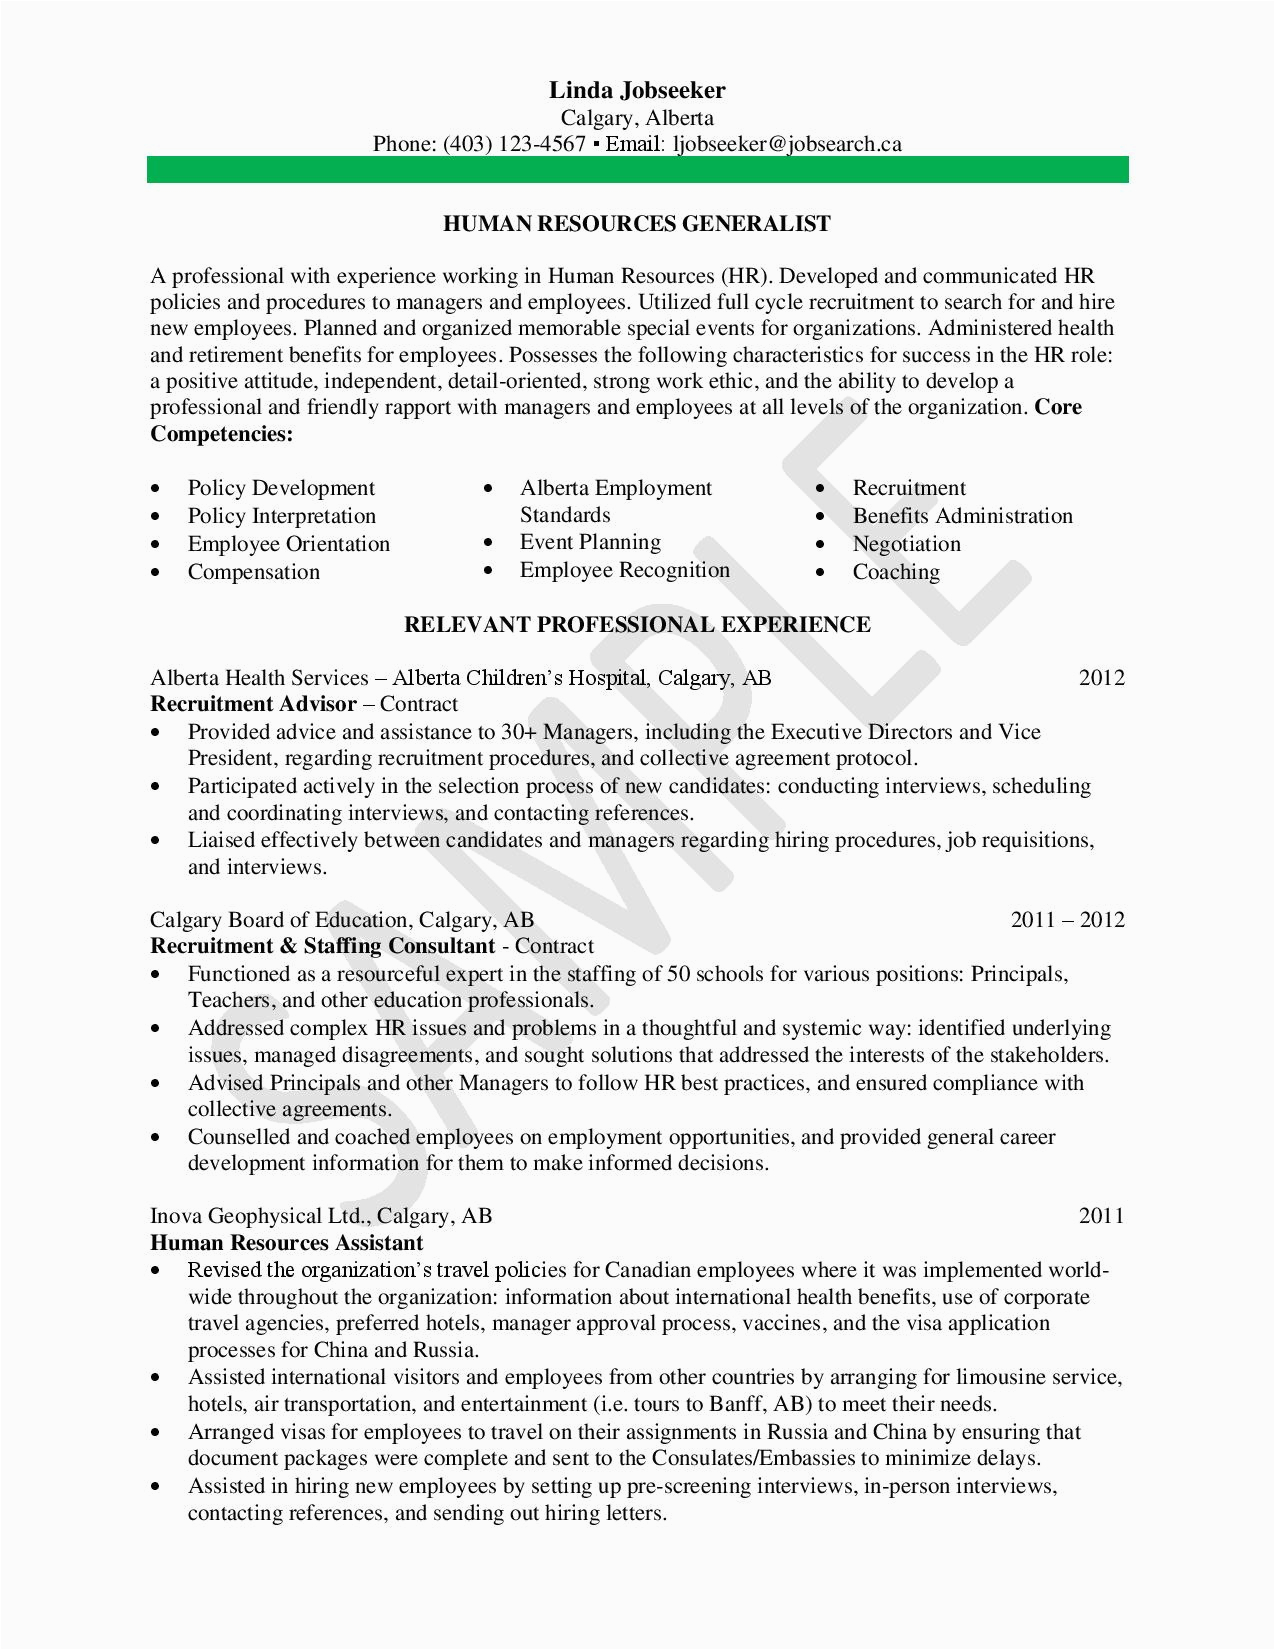 Resume Templates for Human Resources Generalist Human Resources Generalist Resume Page 001 – Resumes